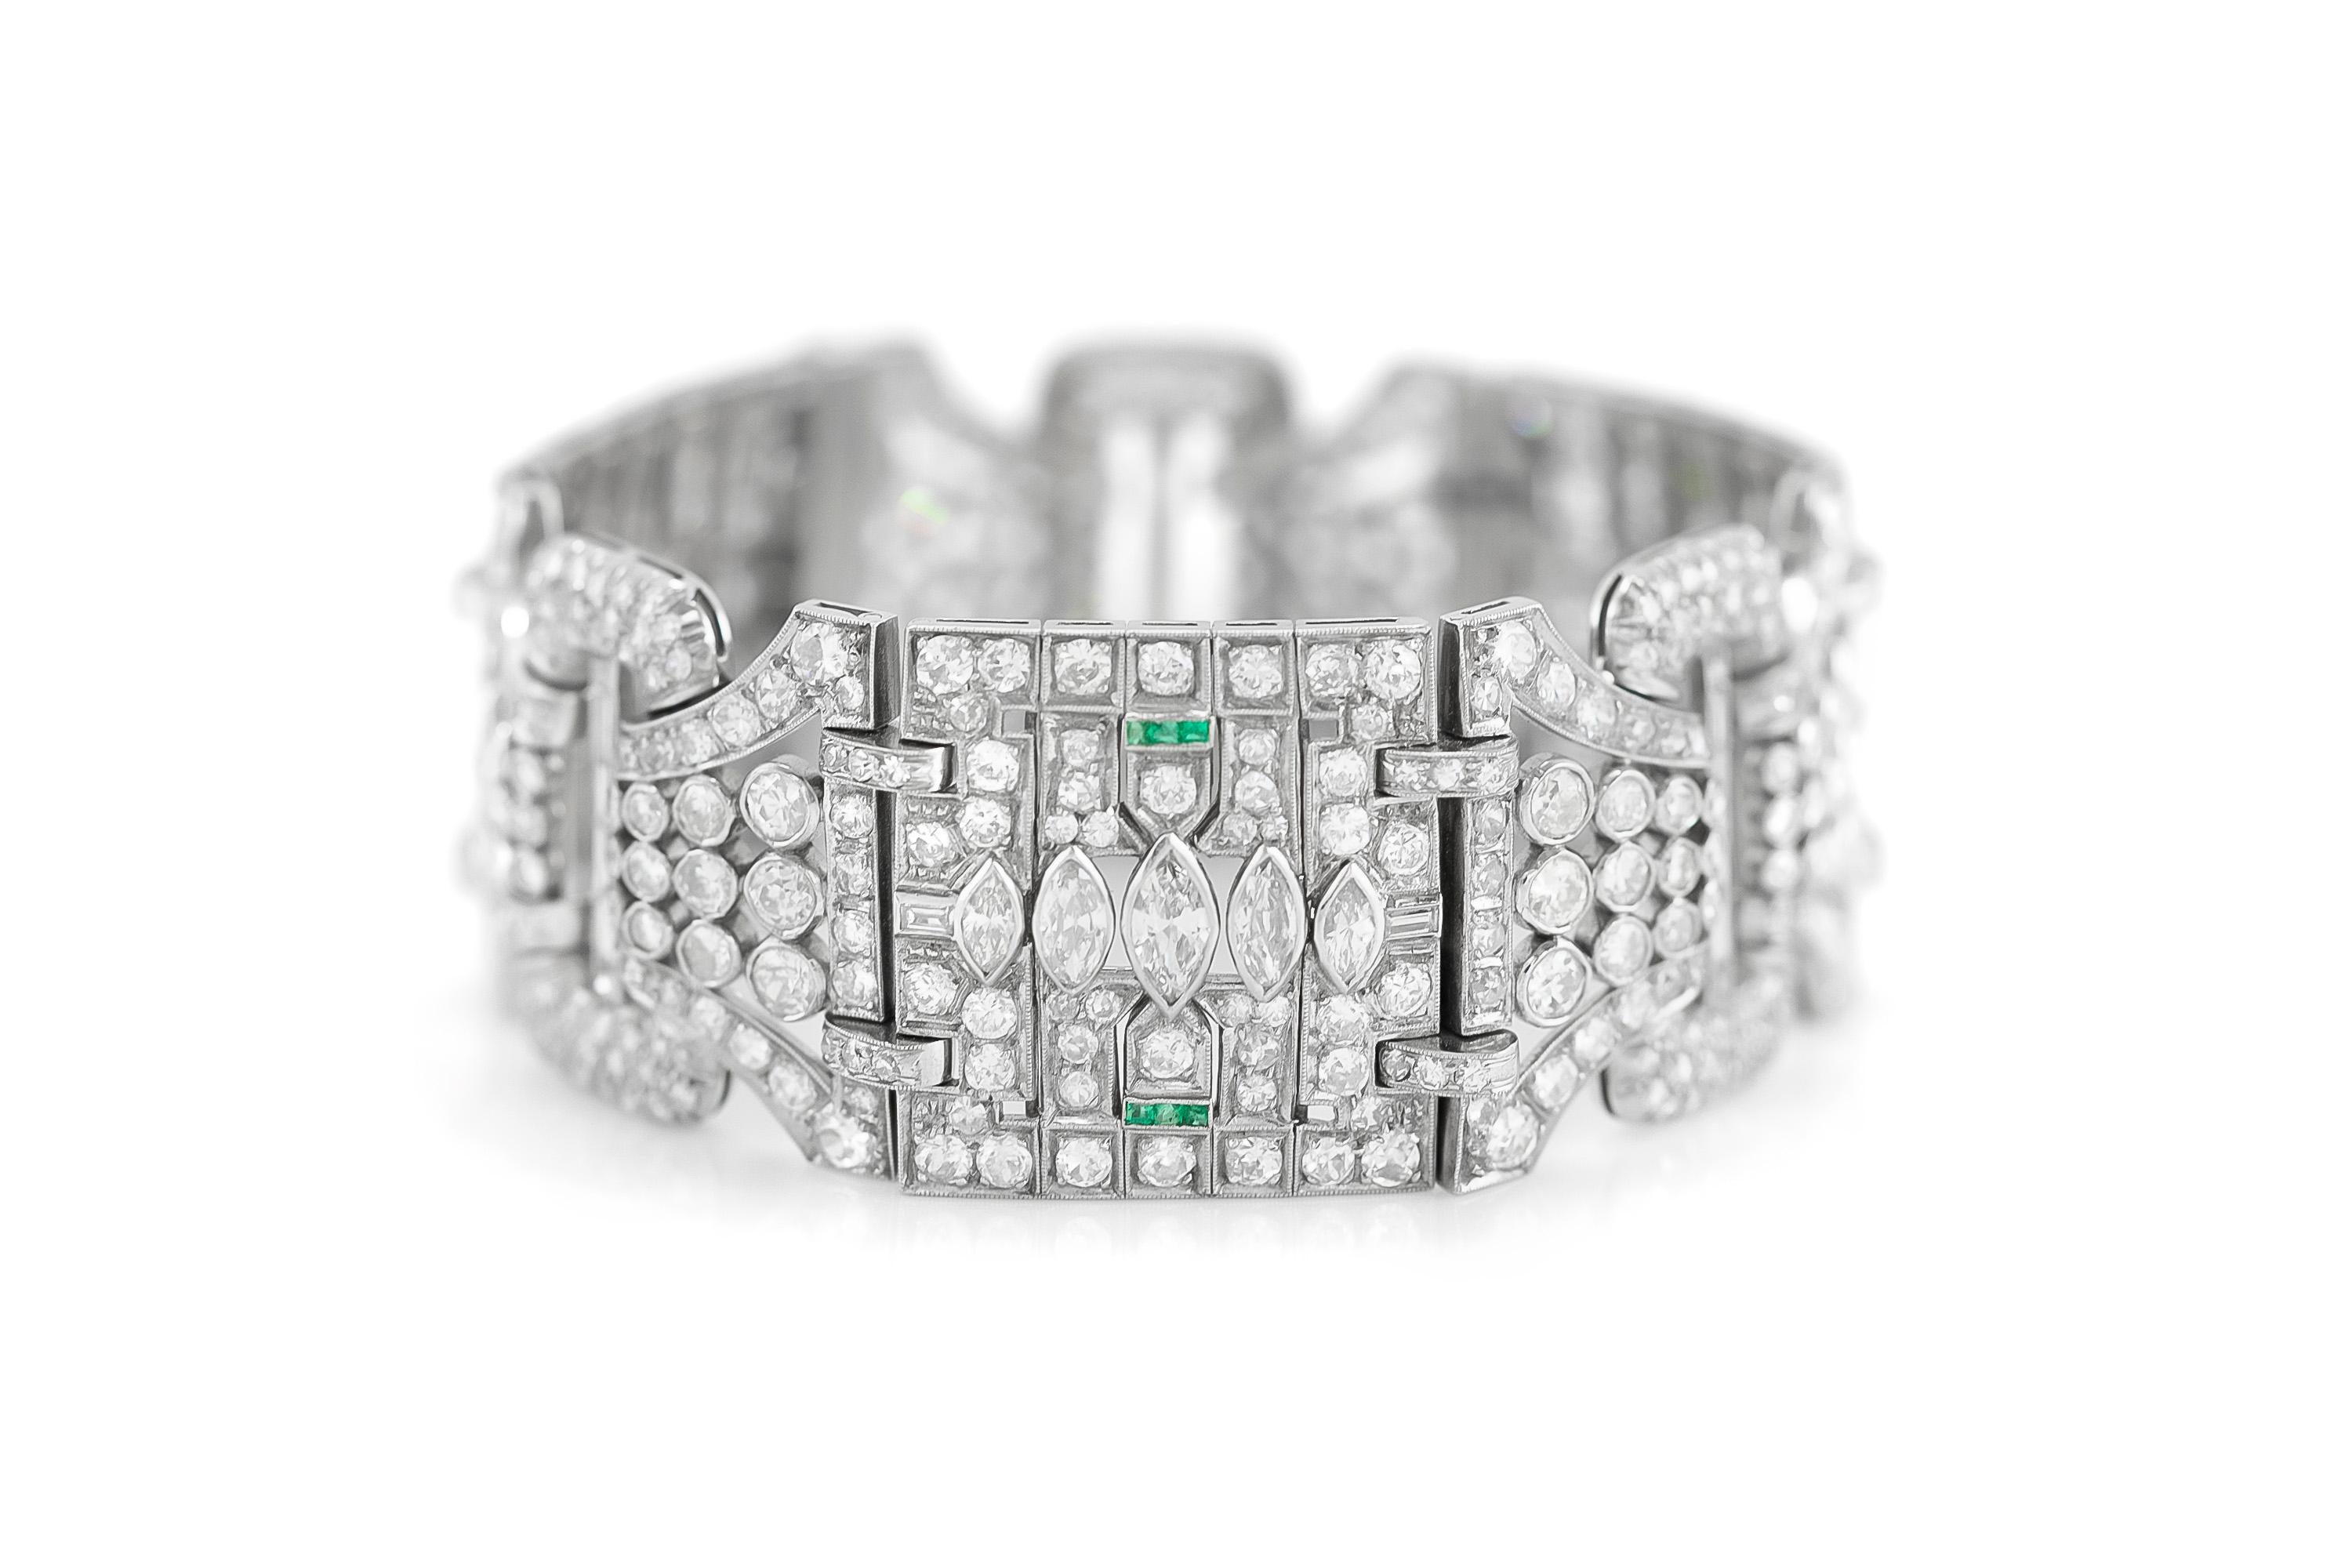 The beautiful bracelet is finely crafted in platinum with diferrent cut of diamonds weighing approximately total of 48.00 carat.
Original setting and diamonds.
Circa 1920's.